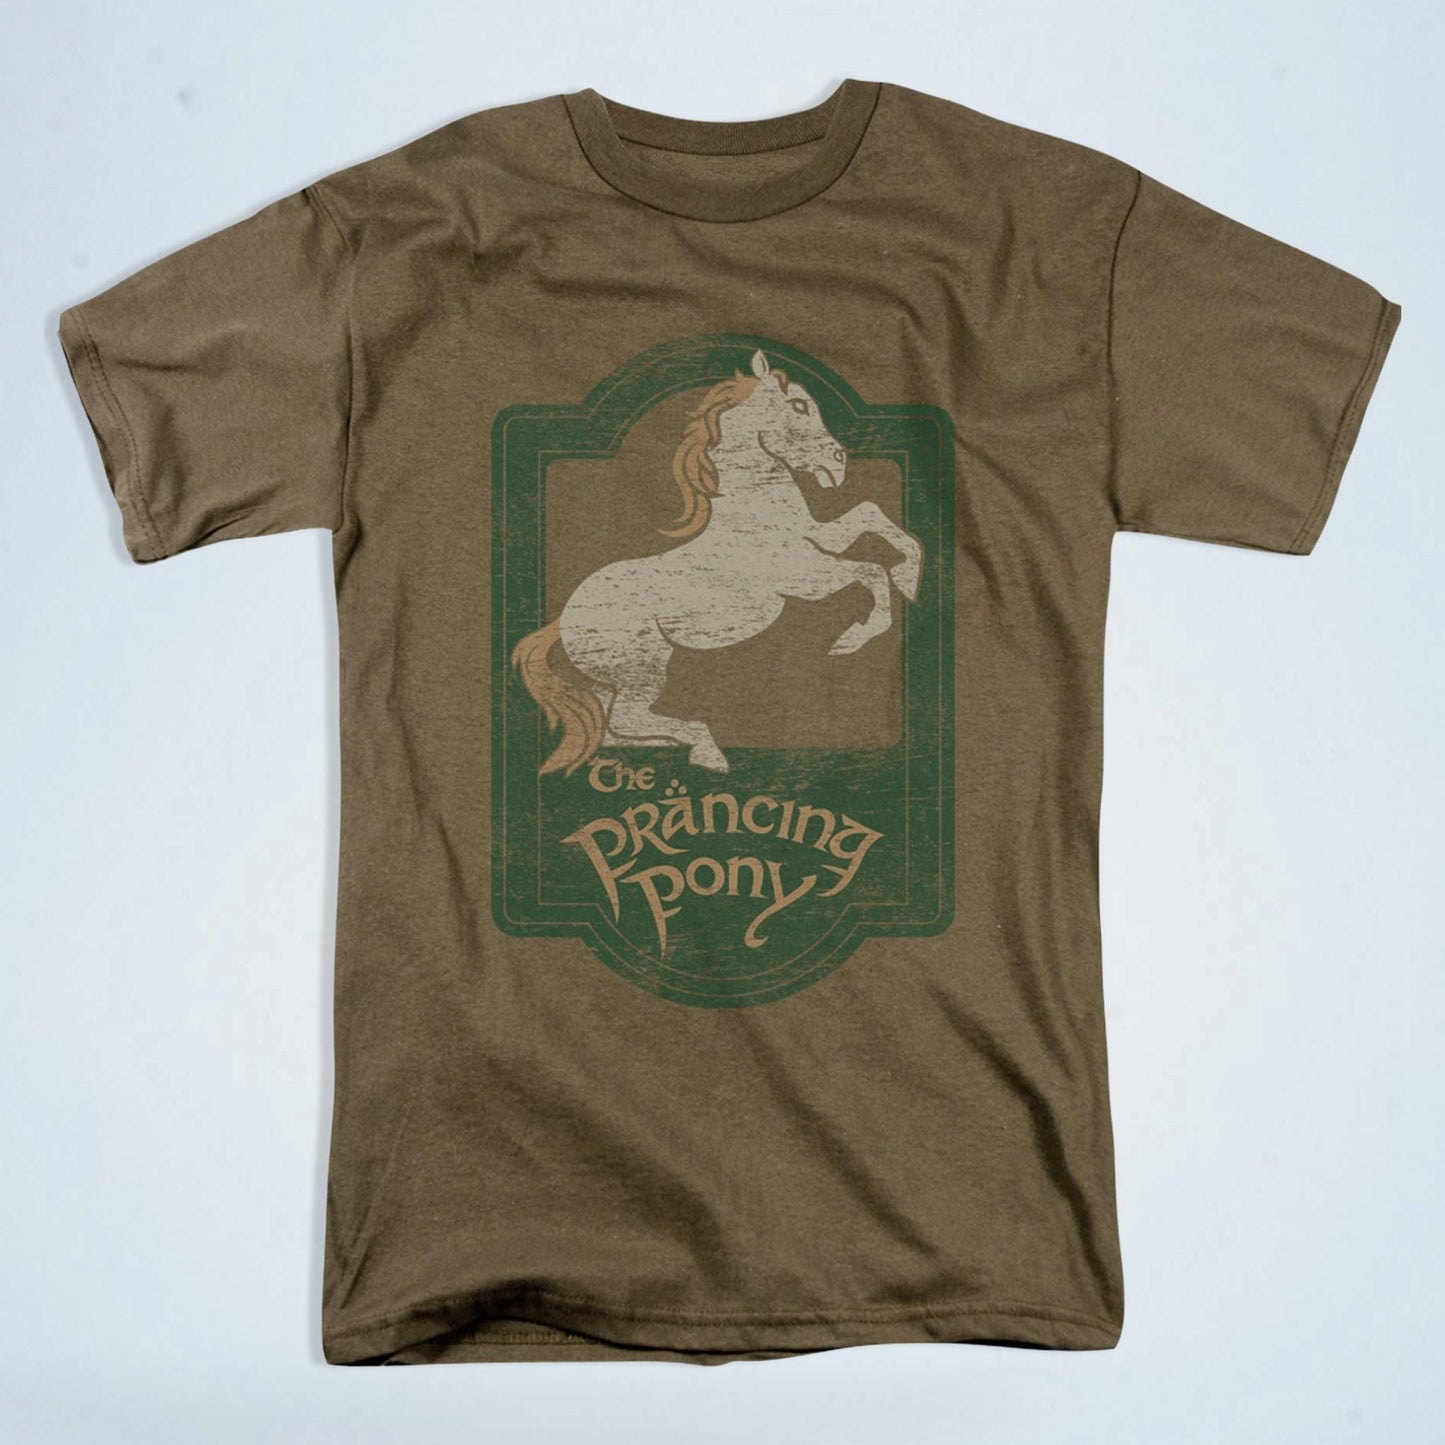 The Prancing Pony Inn Lord of the Rings Shirt